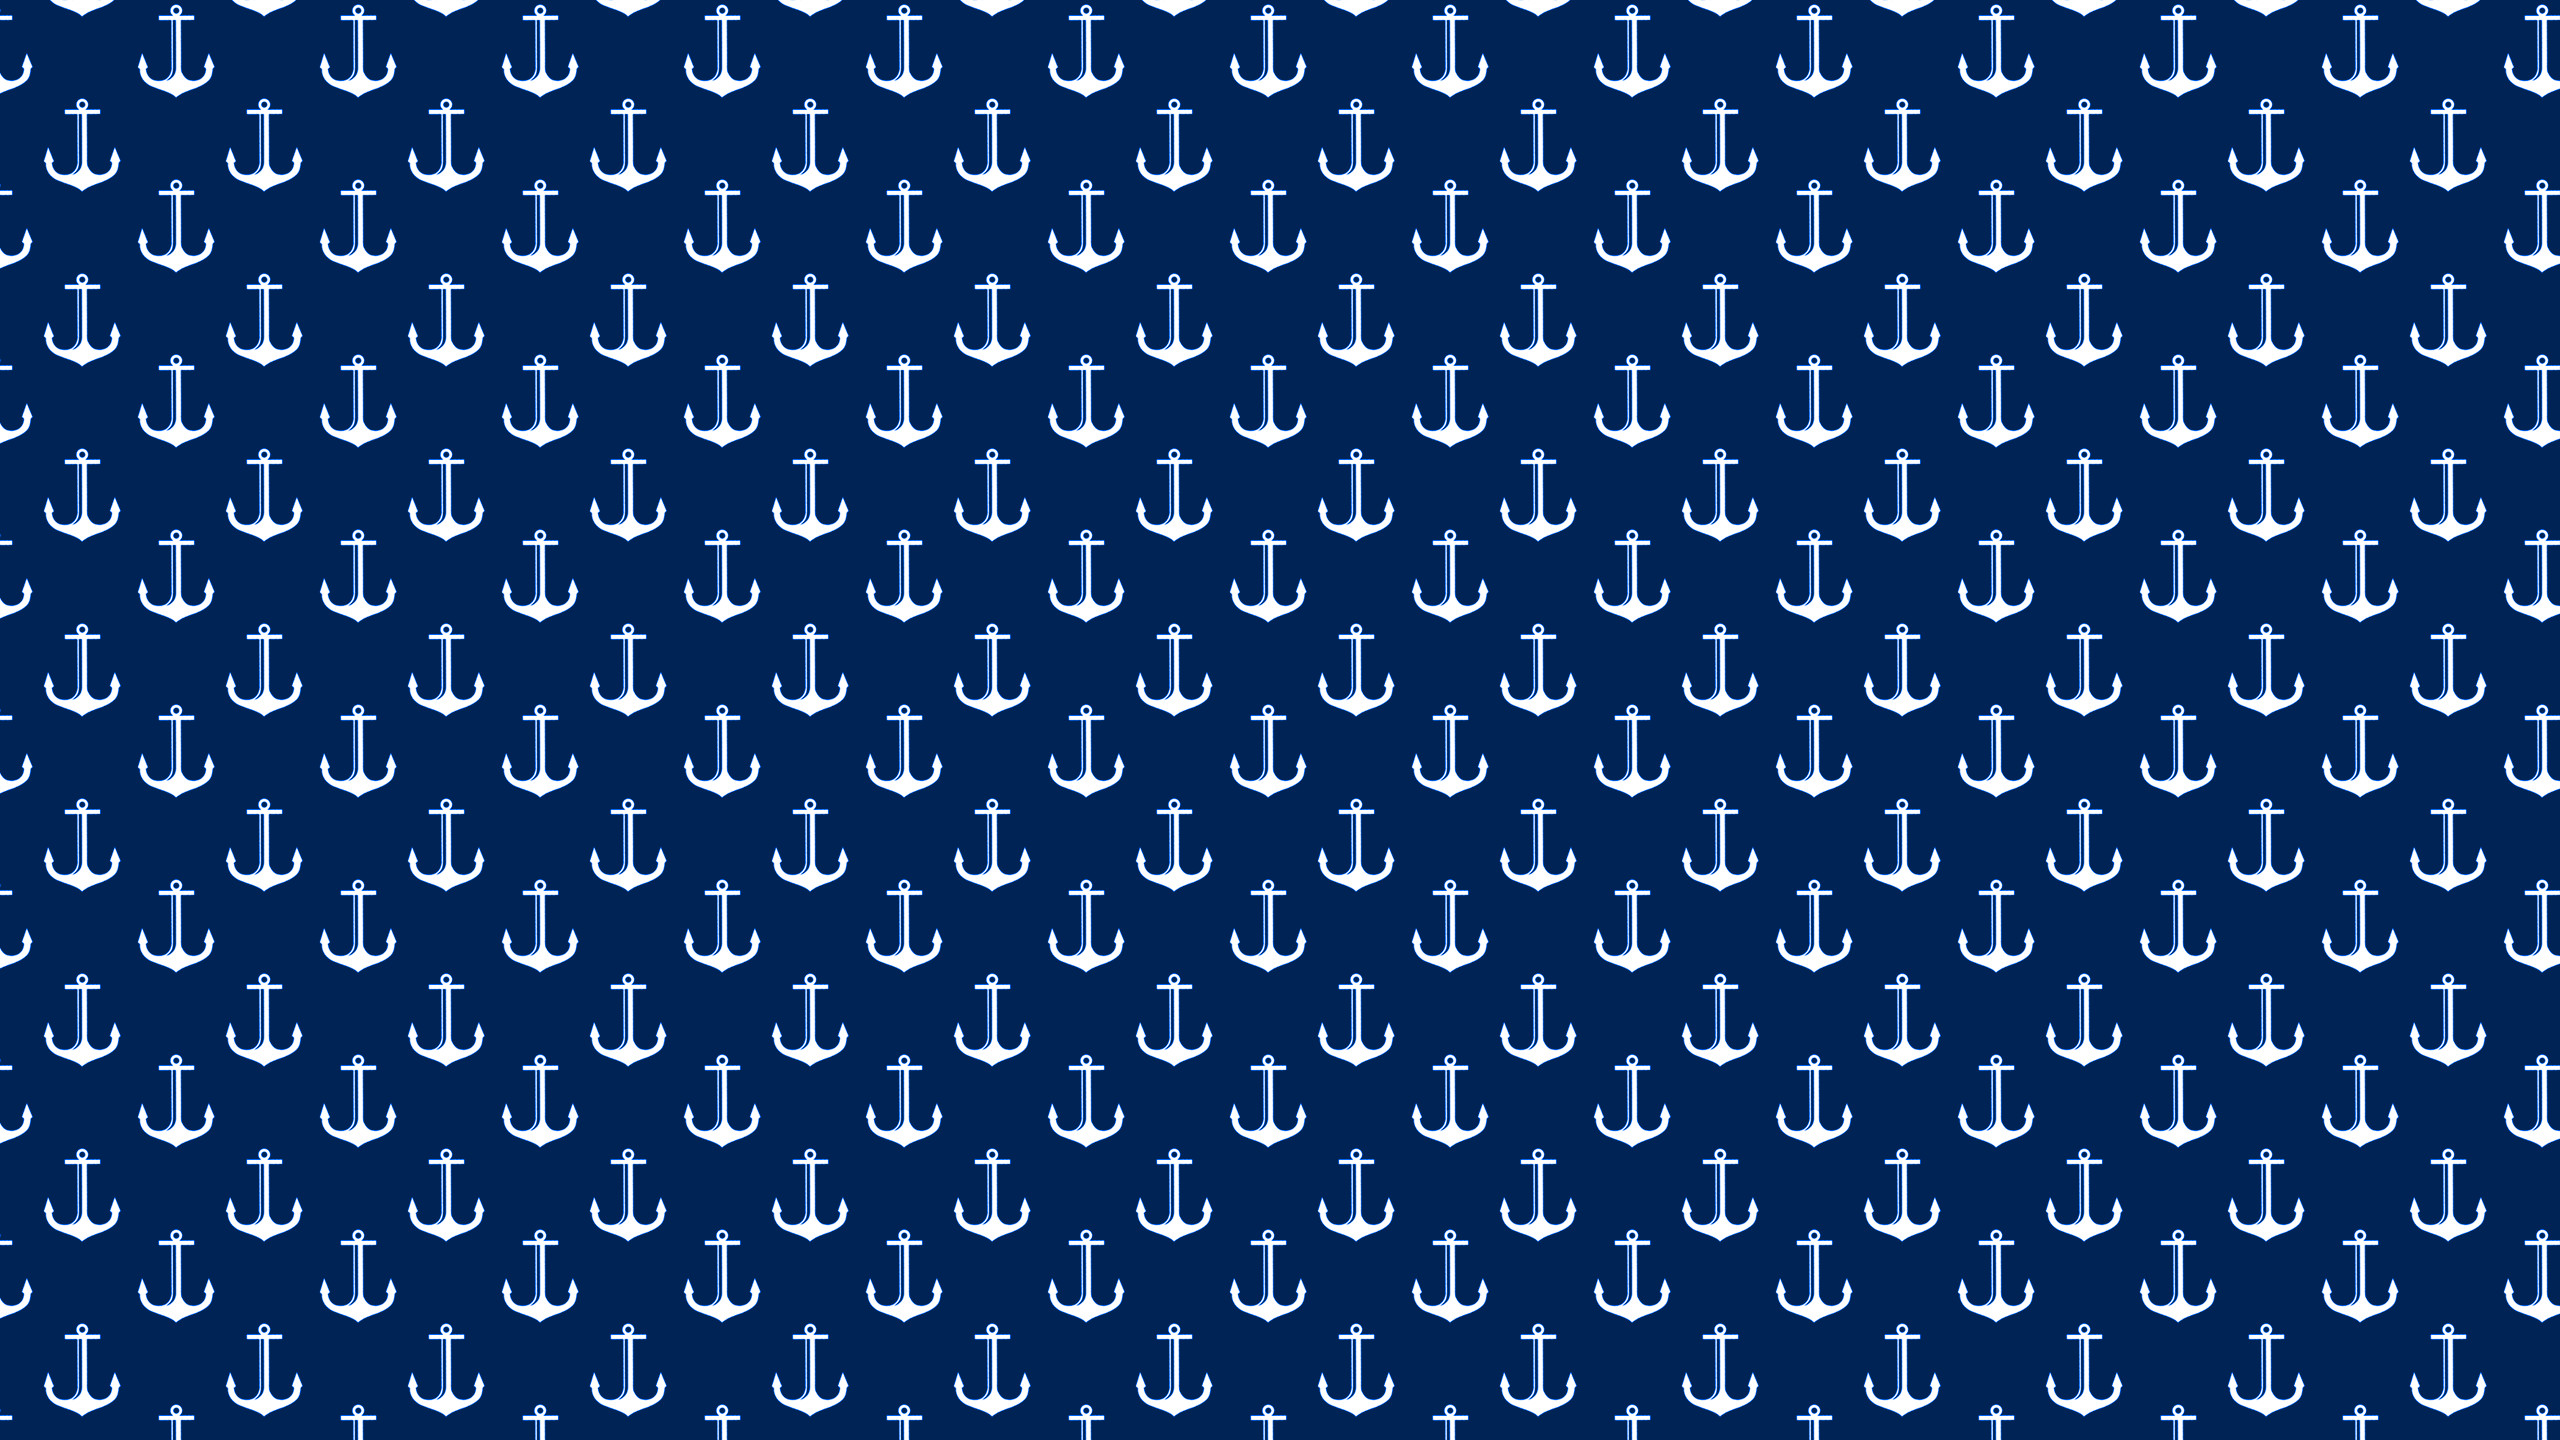 2560x1440 Girly Anchor Wallpaper And White Anchor Wallpaper